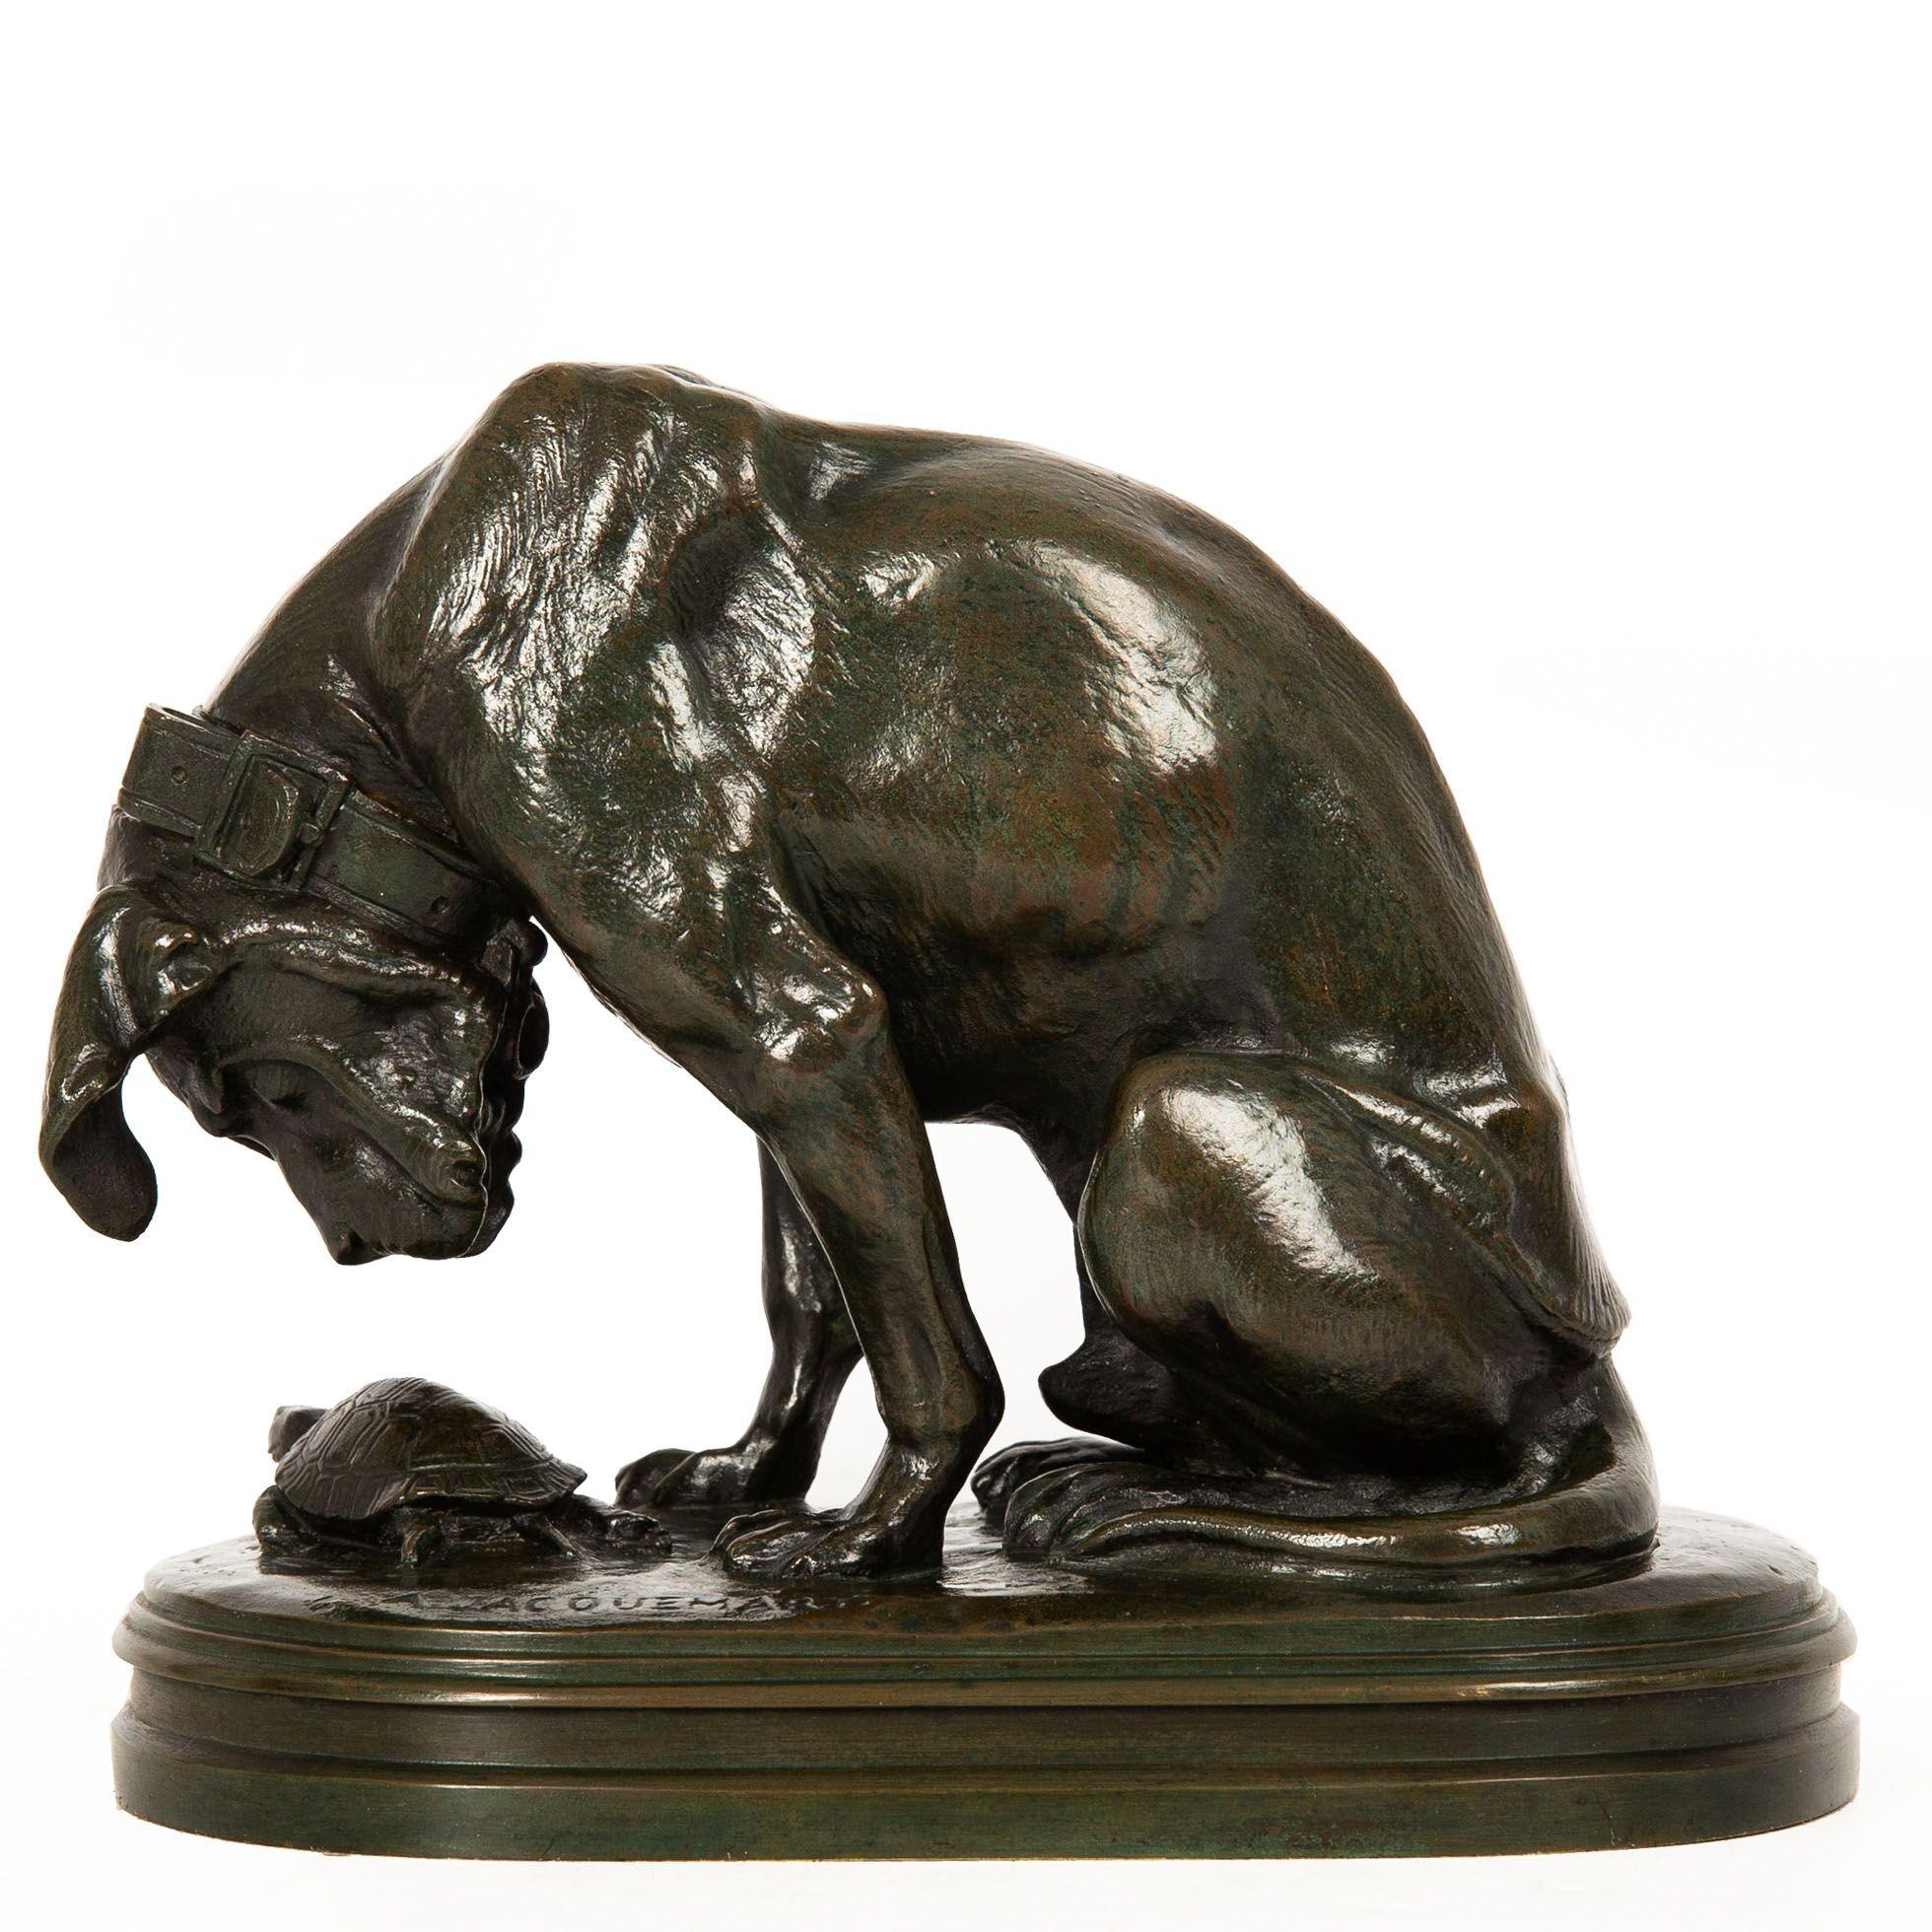 A difficult model to find and always highly sought-after, this fine example of Jacquemart's Hound and the Tortoise retains an attractive original patina that is overall greenish-brown with ever-so-faint reddish undertones. The application of the